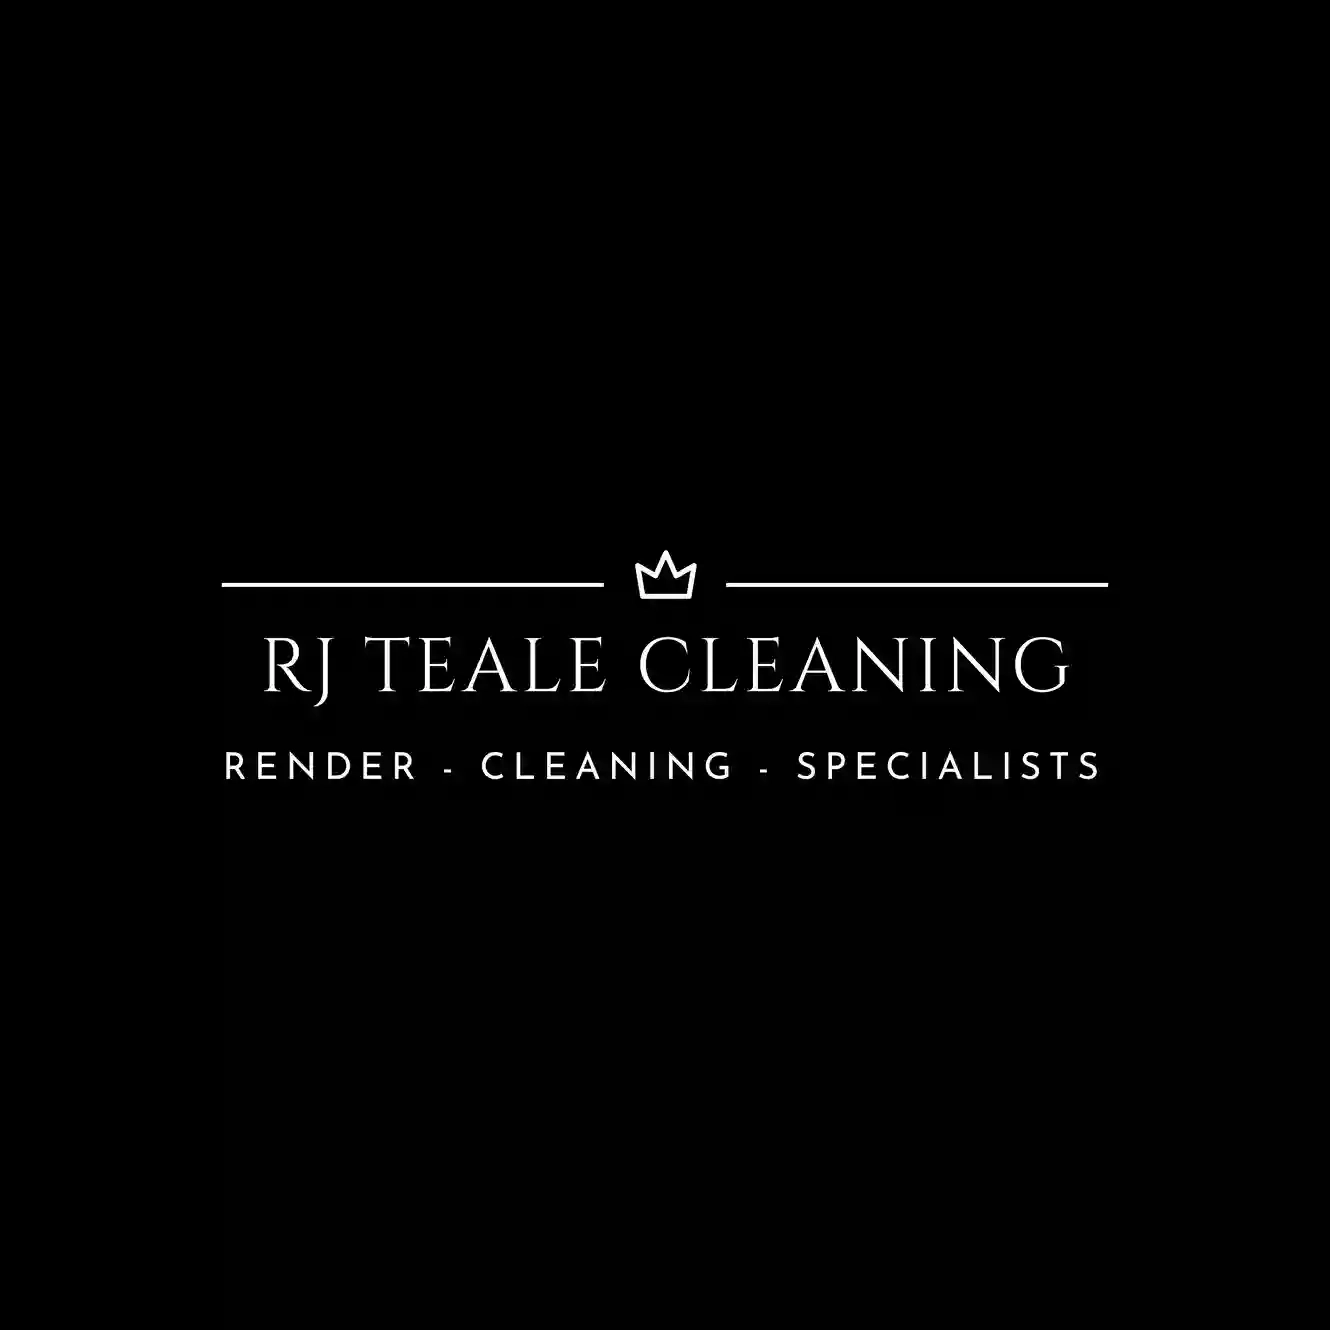 RJ TEALE CLEANING